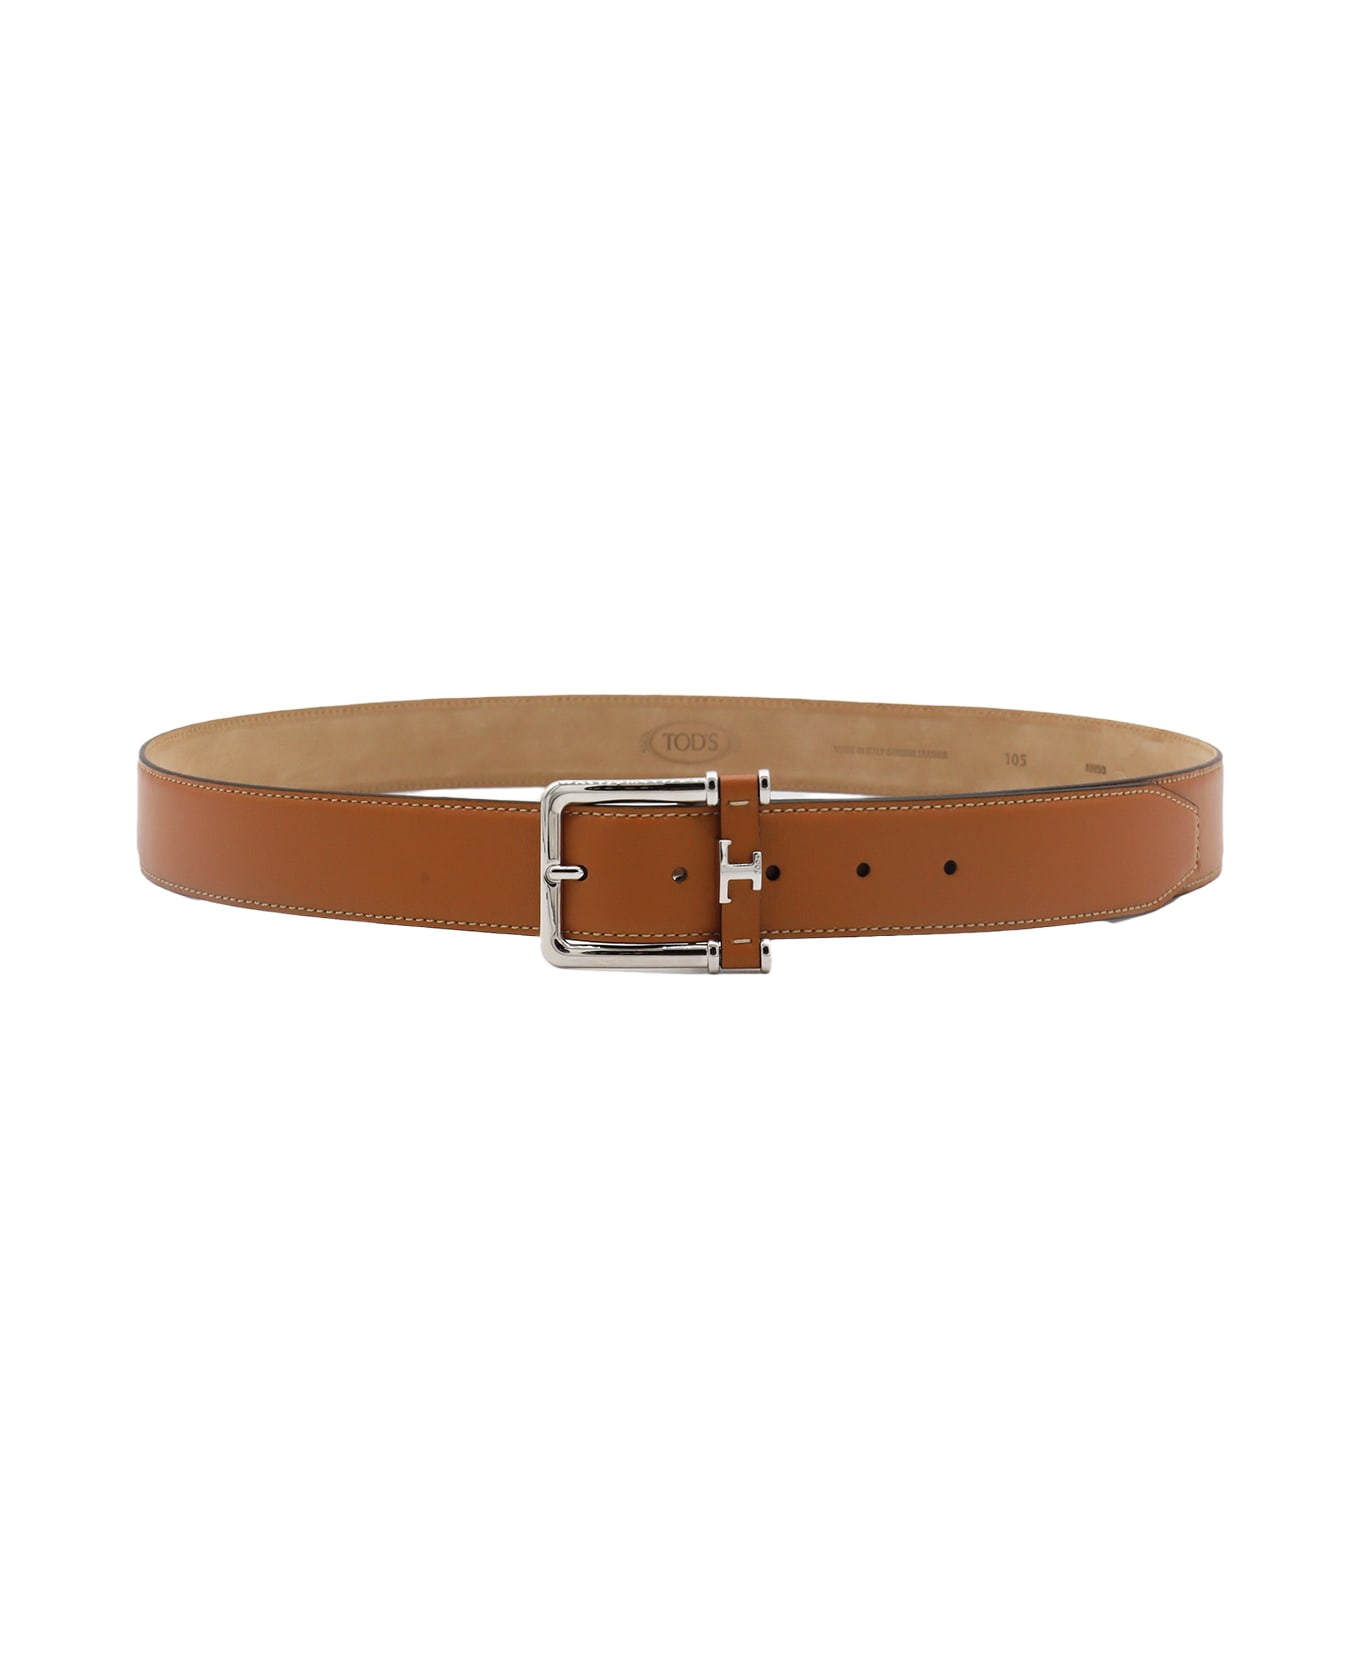 Tod's Brown Leather Belt - KENIA SCURO